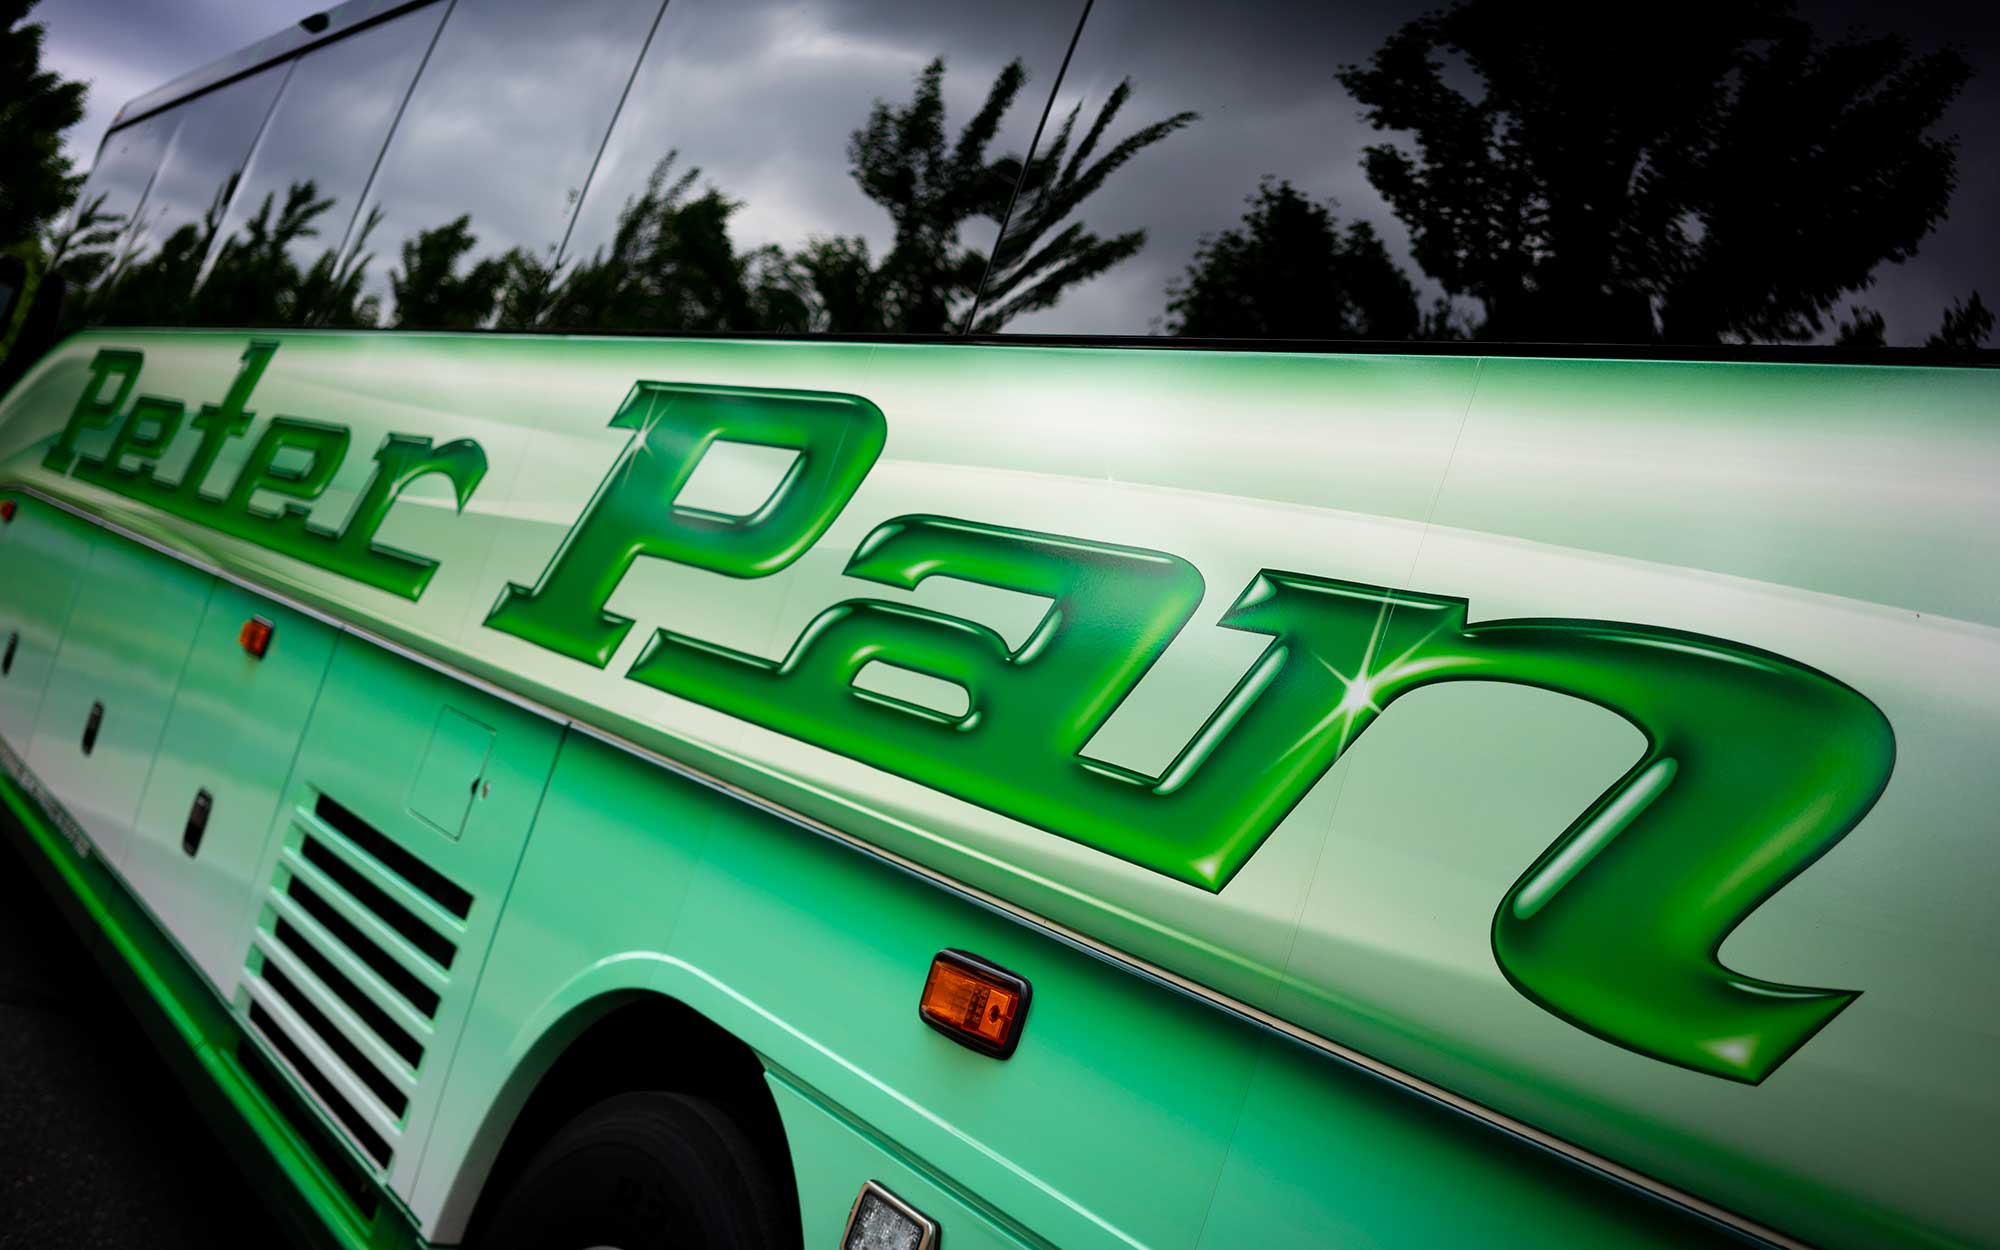 Peter Pan Bus Lines Celebrates Transportation Week with the CCRTA!